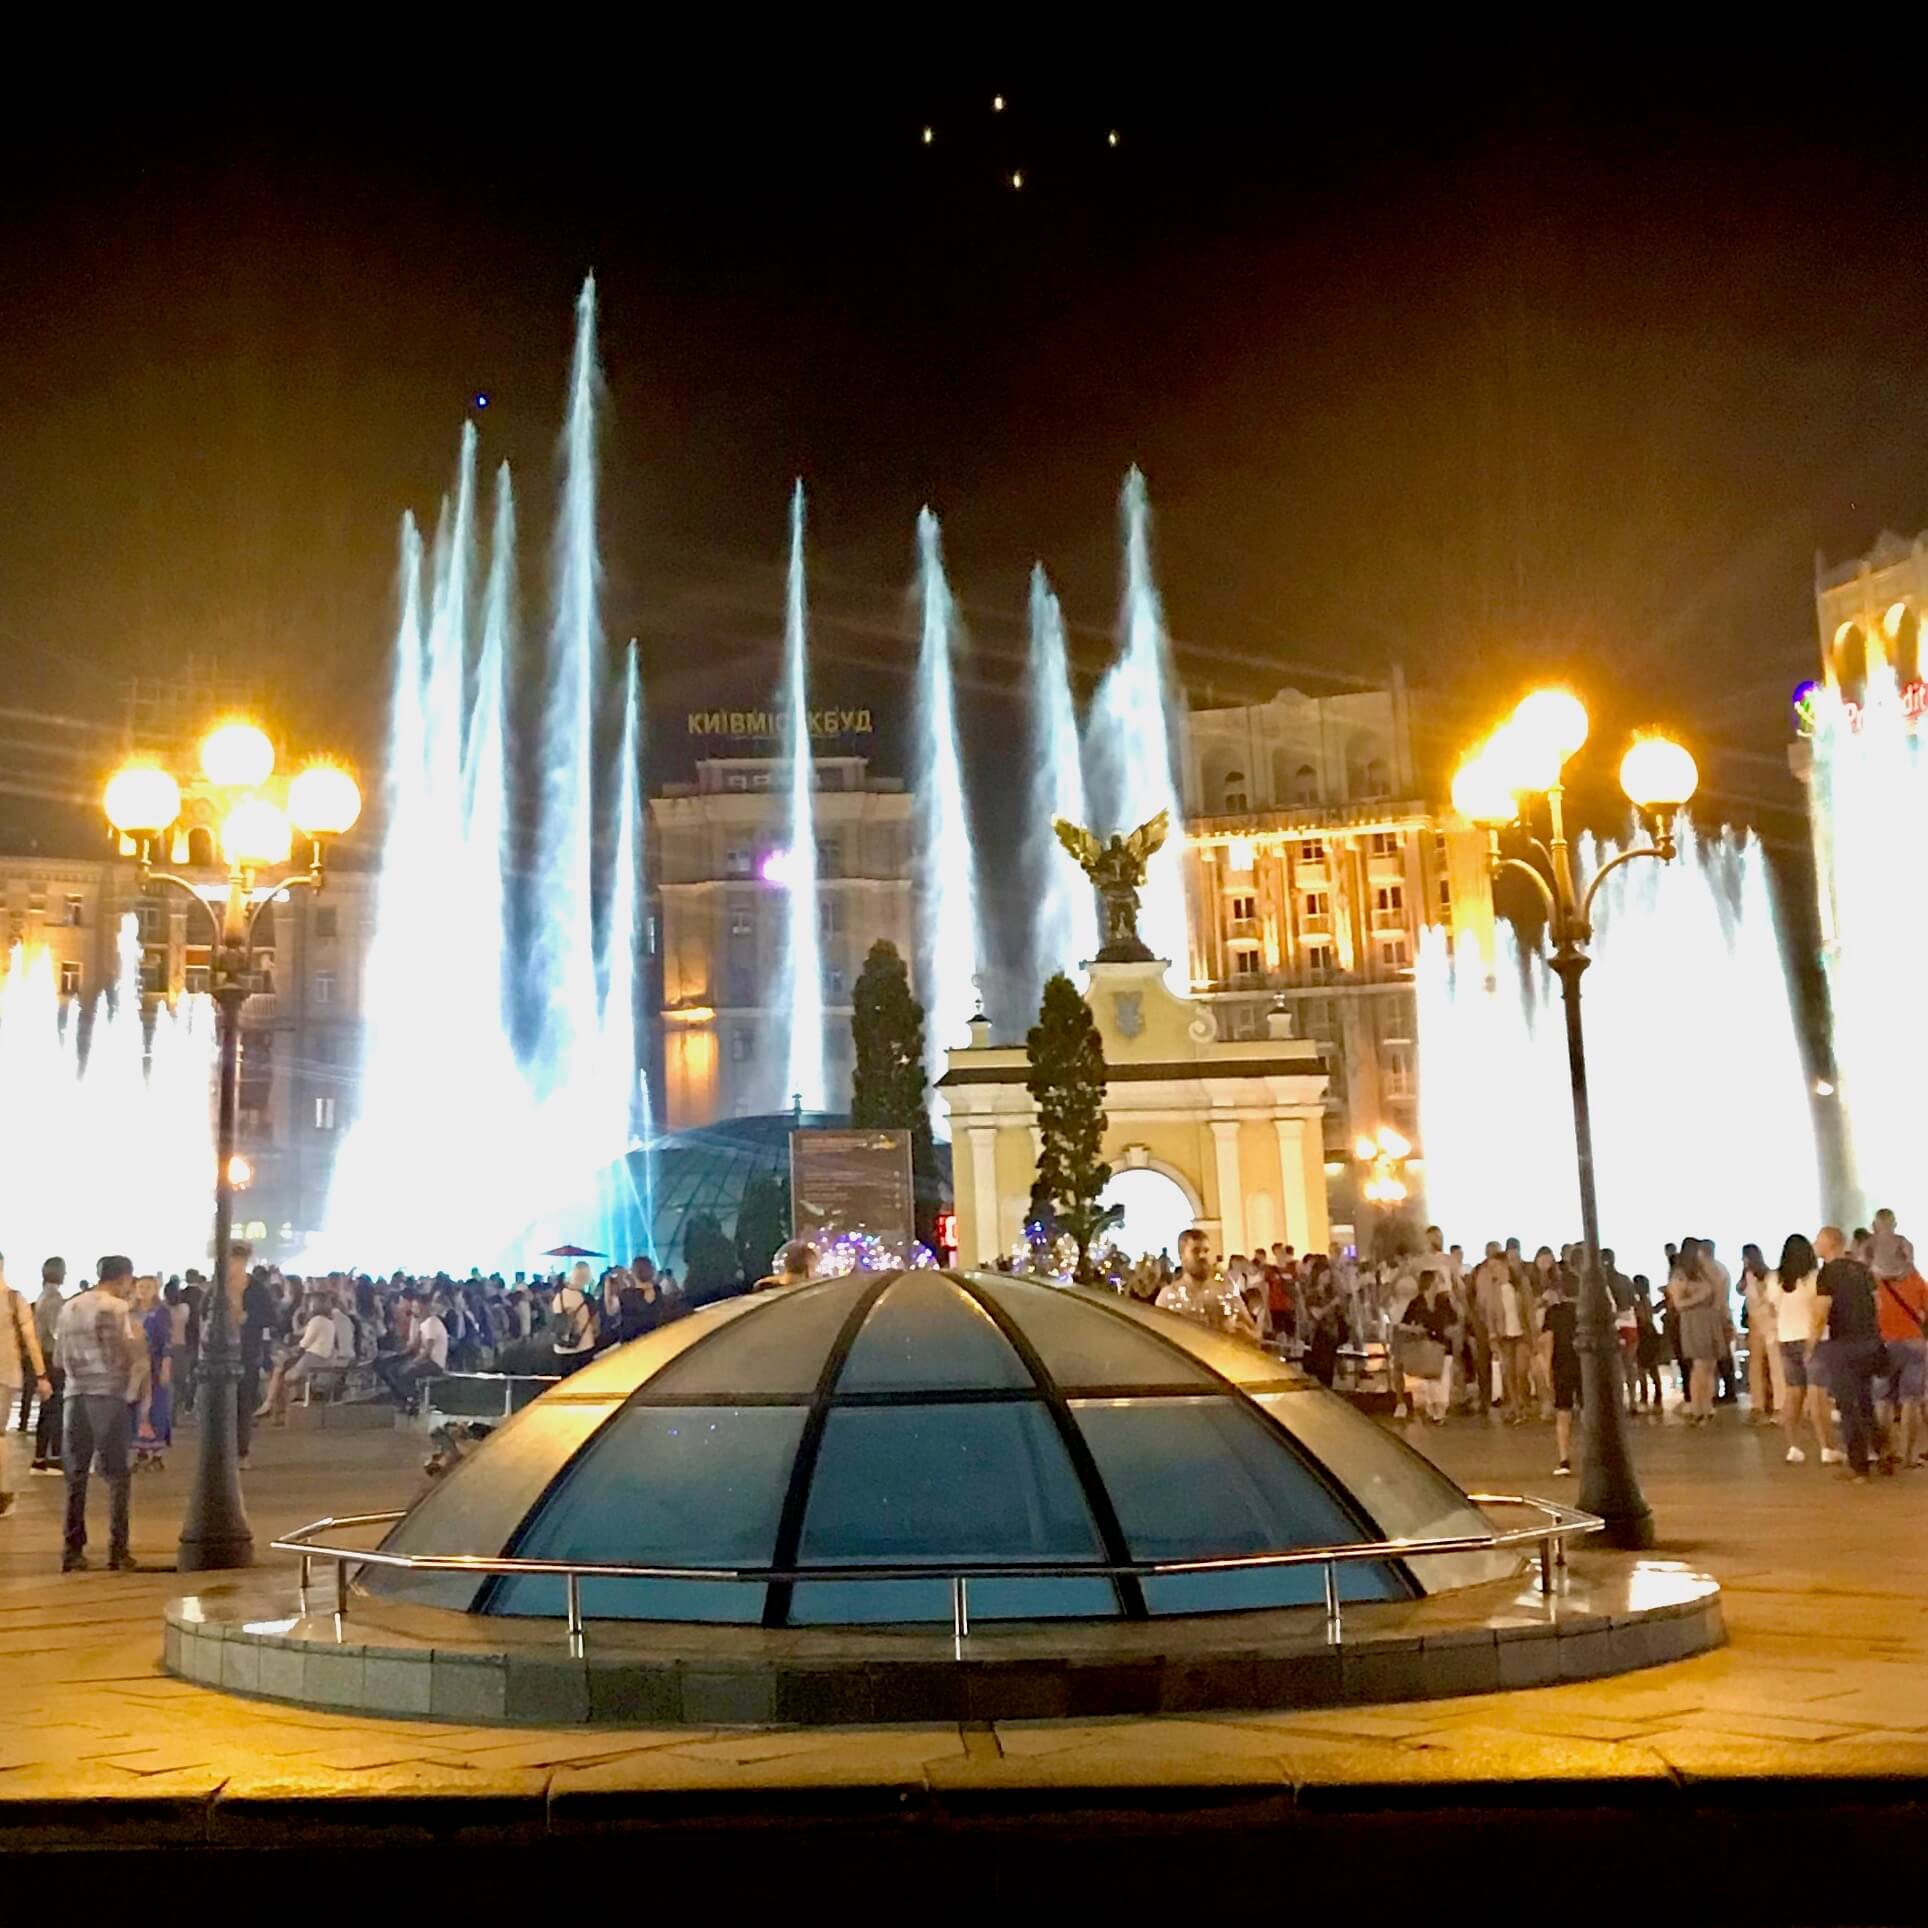 Large cannons of water spray up in a busy nighttime Independence Square in central Kiev.